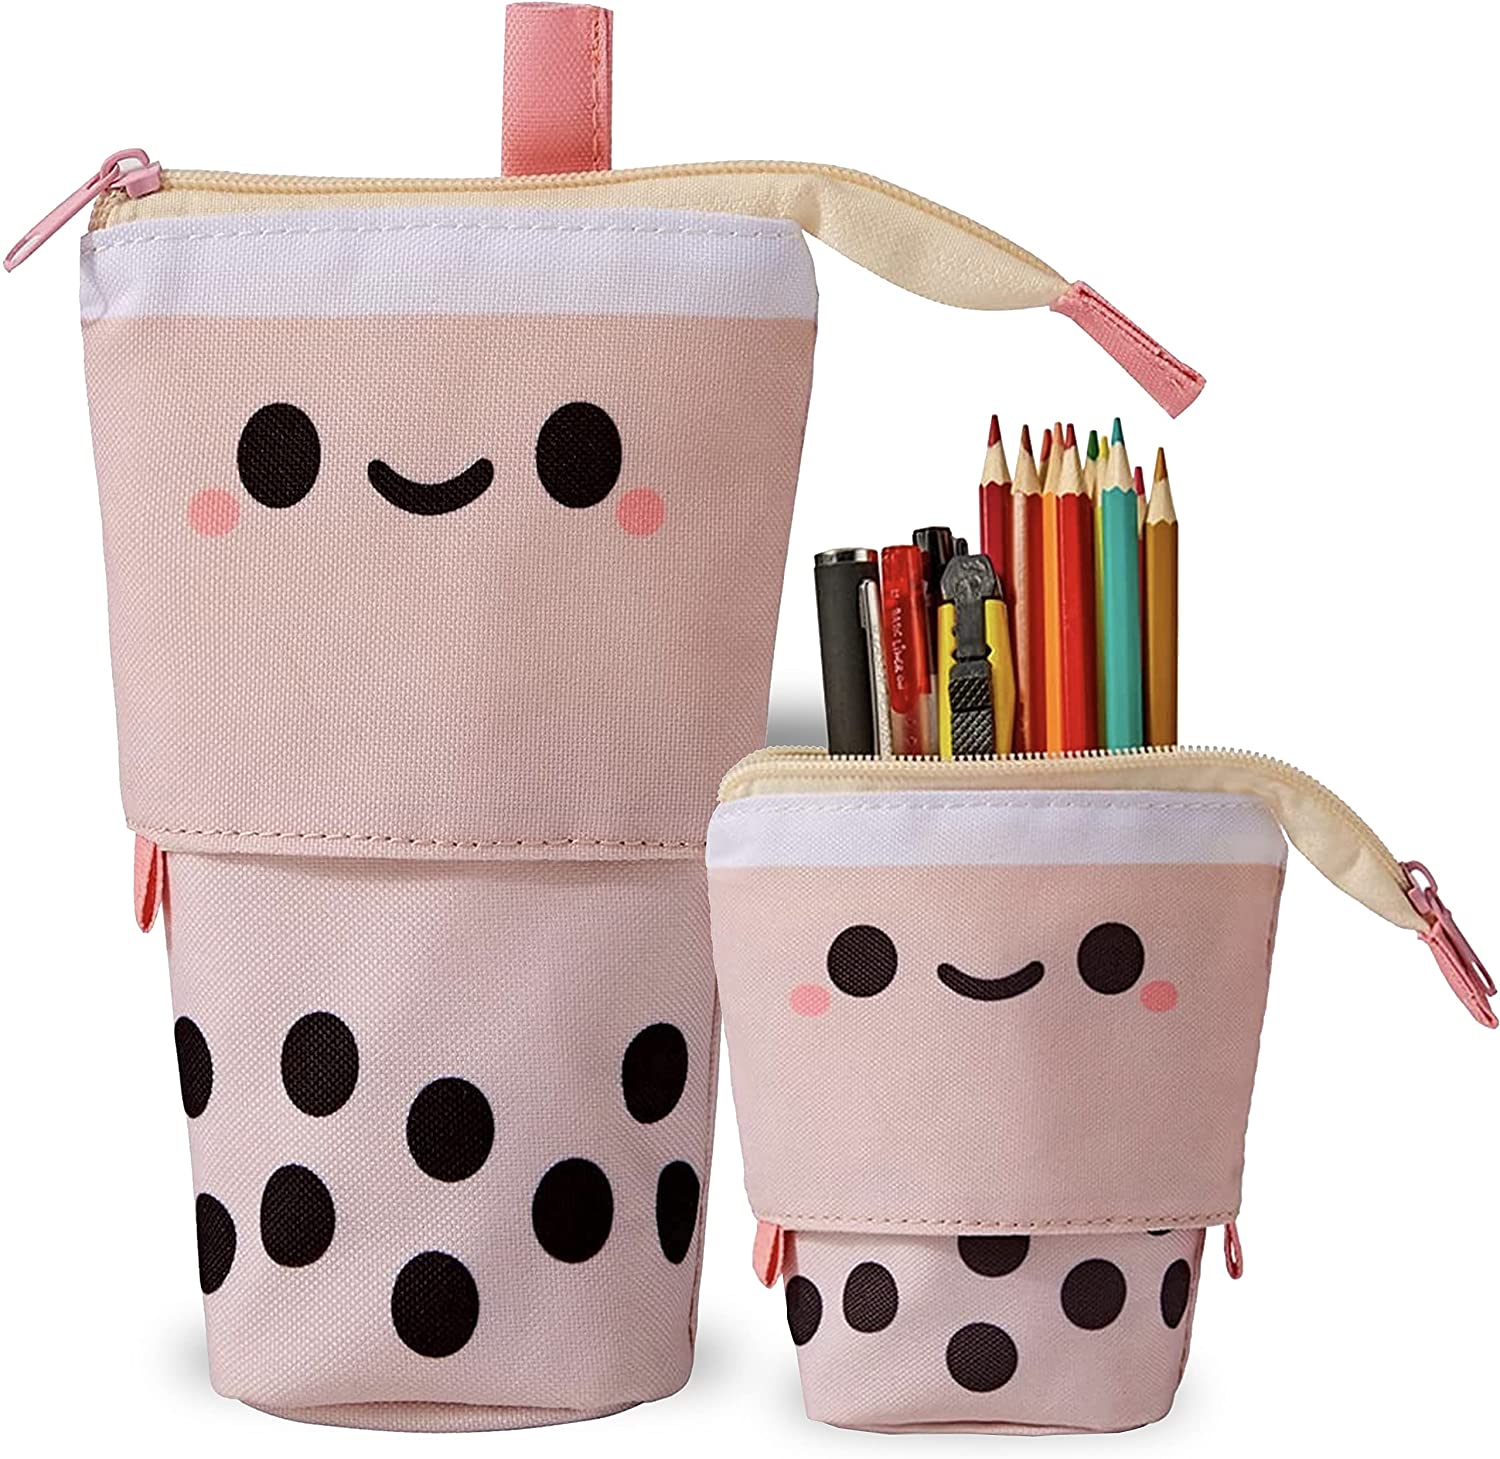 Elpis Cute Telescopic Pencil Case, Pop Up Stationery Case, Kawaii Standing  Pencil Pouch for School Students Girls Boys 